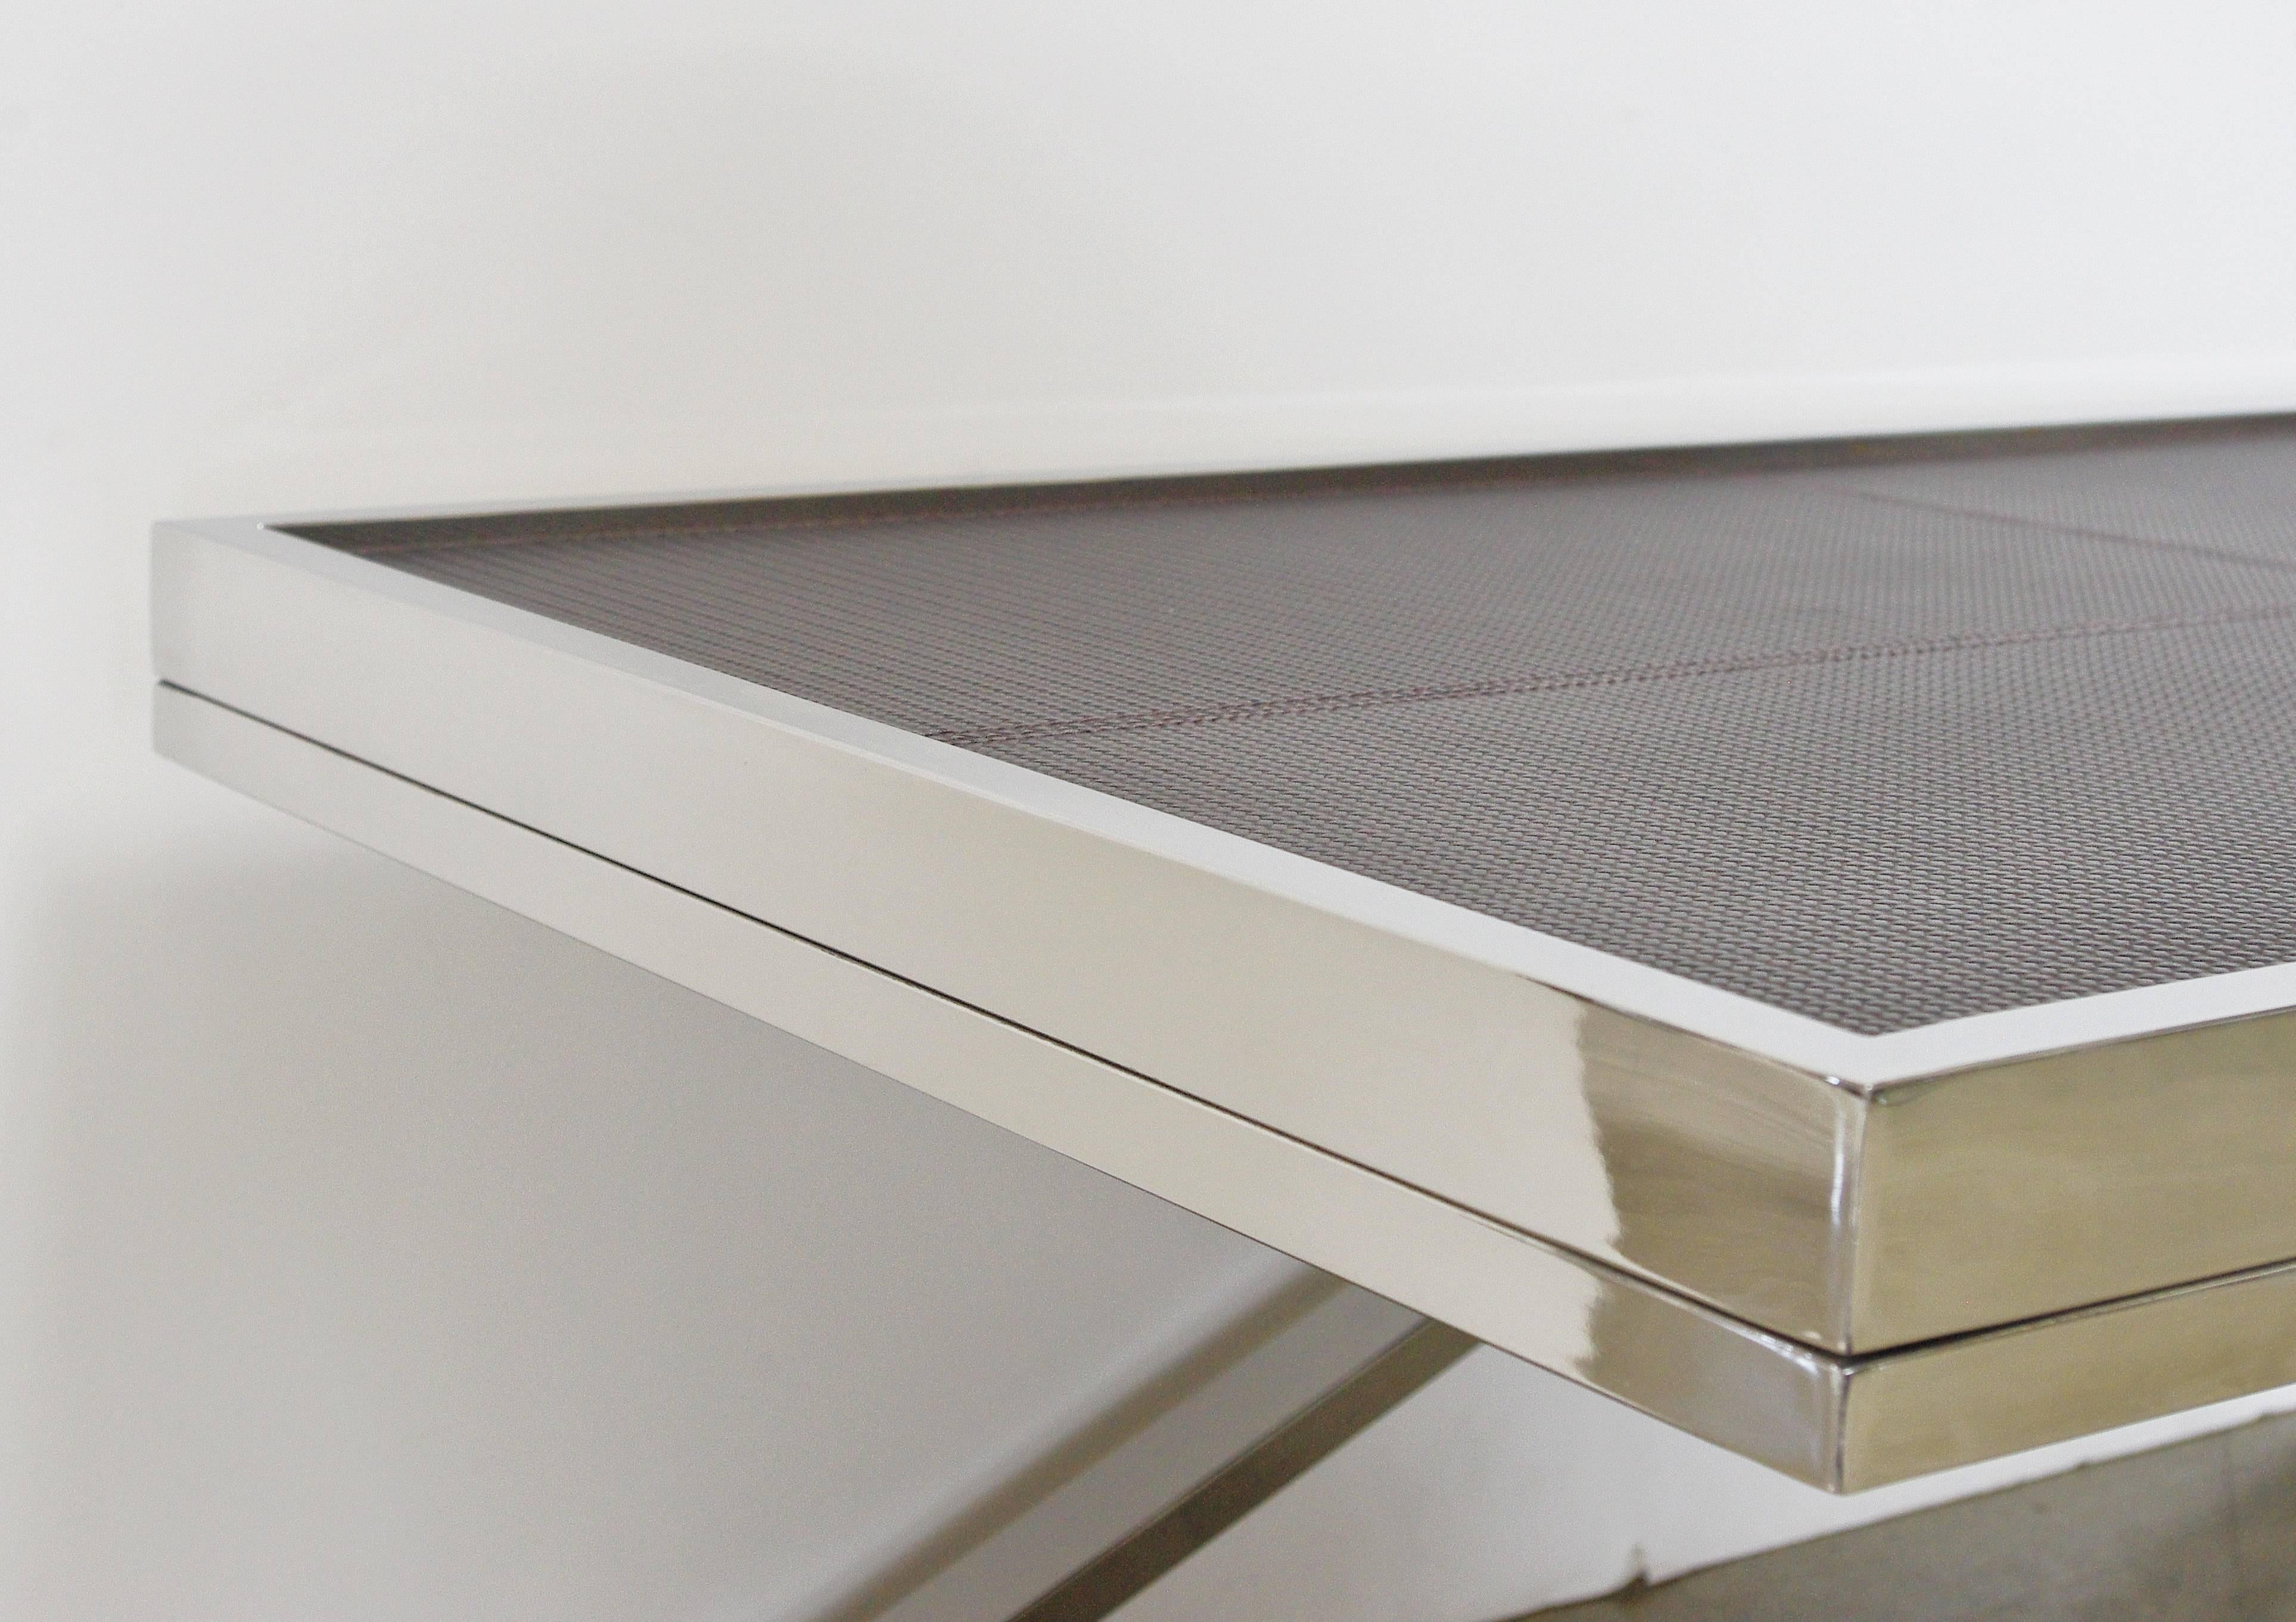 Italian Leather and Stainless Steel Coffee Table by Fabio Ltd FINAL CLEARANCE SALE